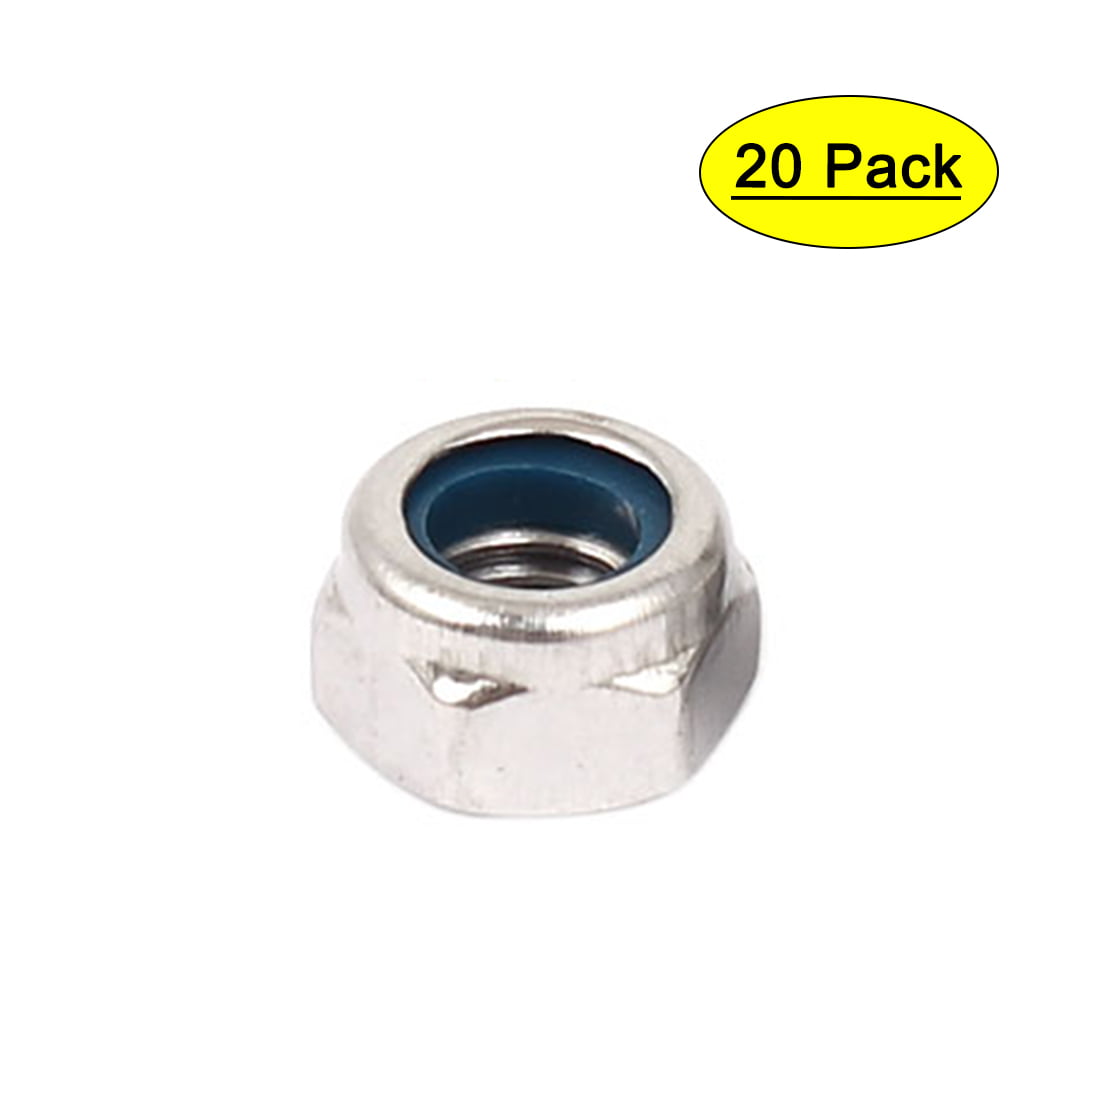 Lot of 250 Pcs. 6-32 Stainless Steel Nylon Insert Hex Lock Nuts 